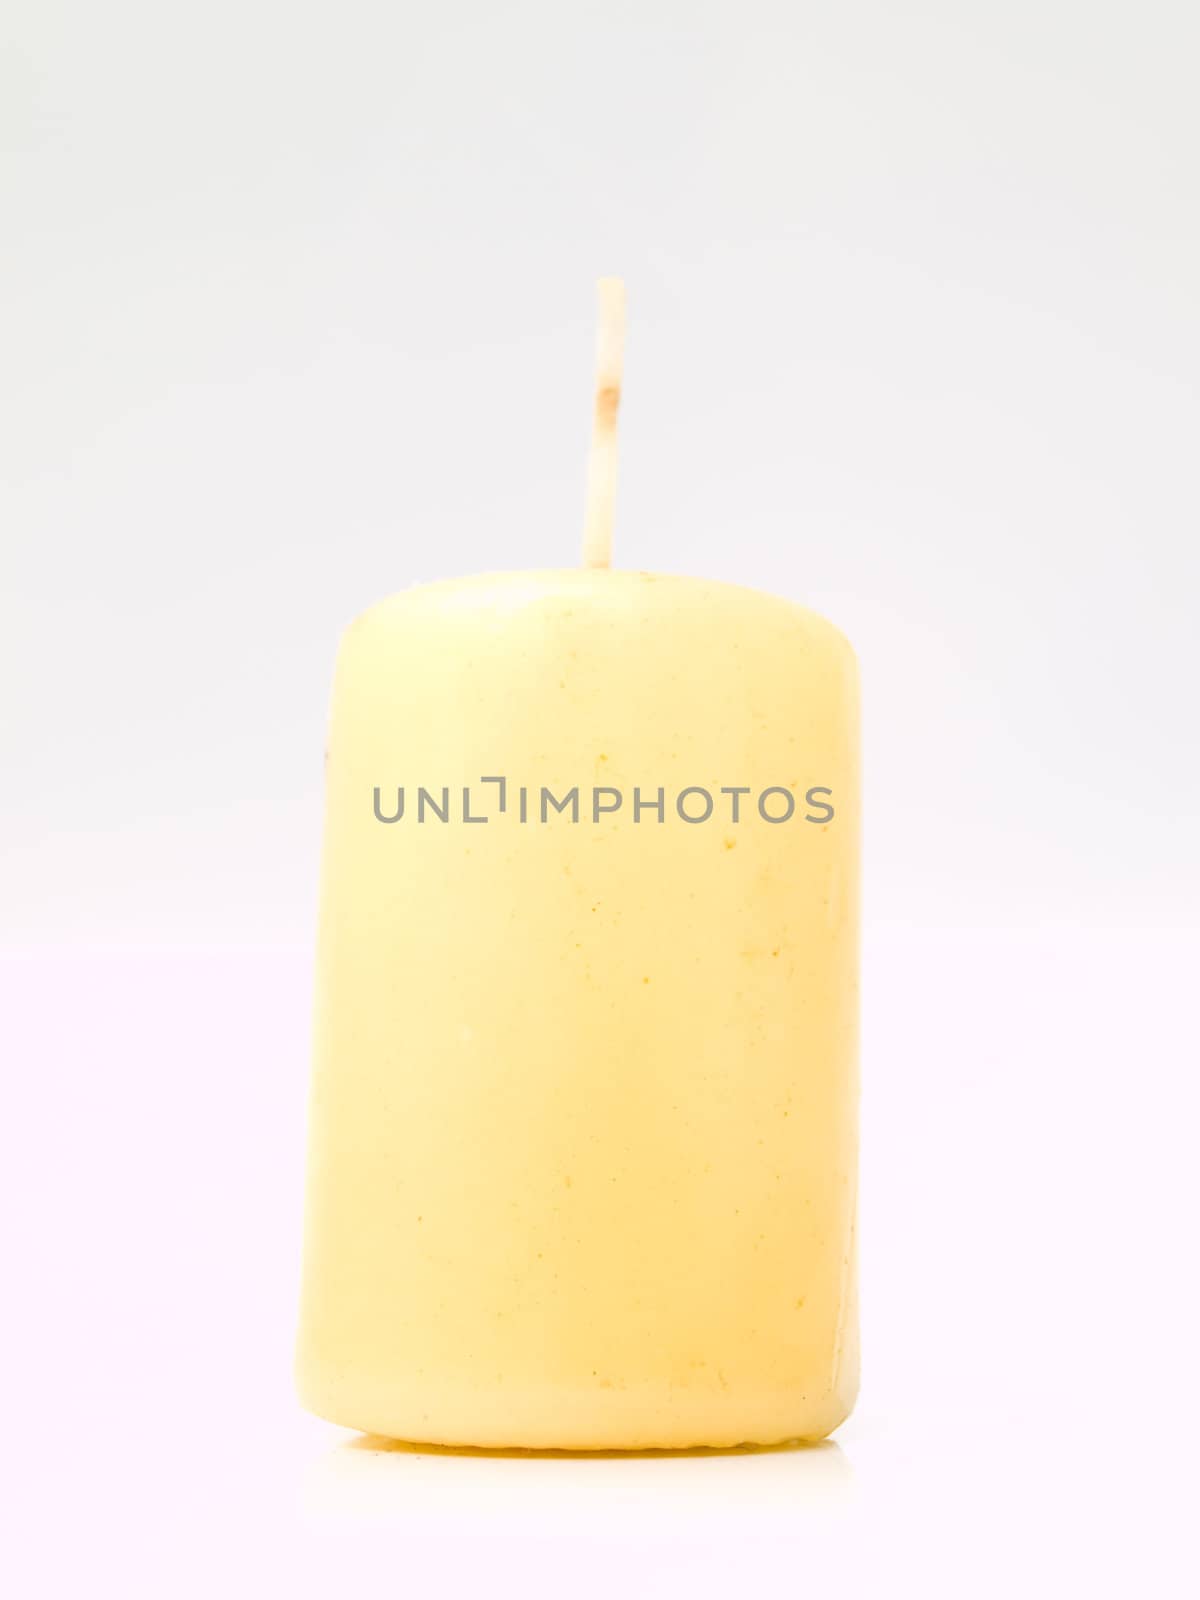 Tall yellow wax candle on white